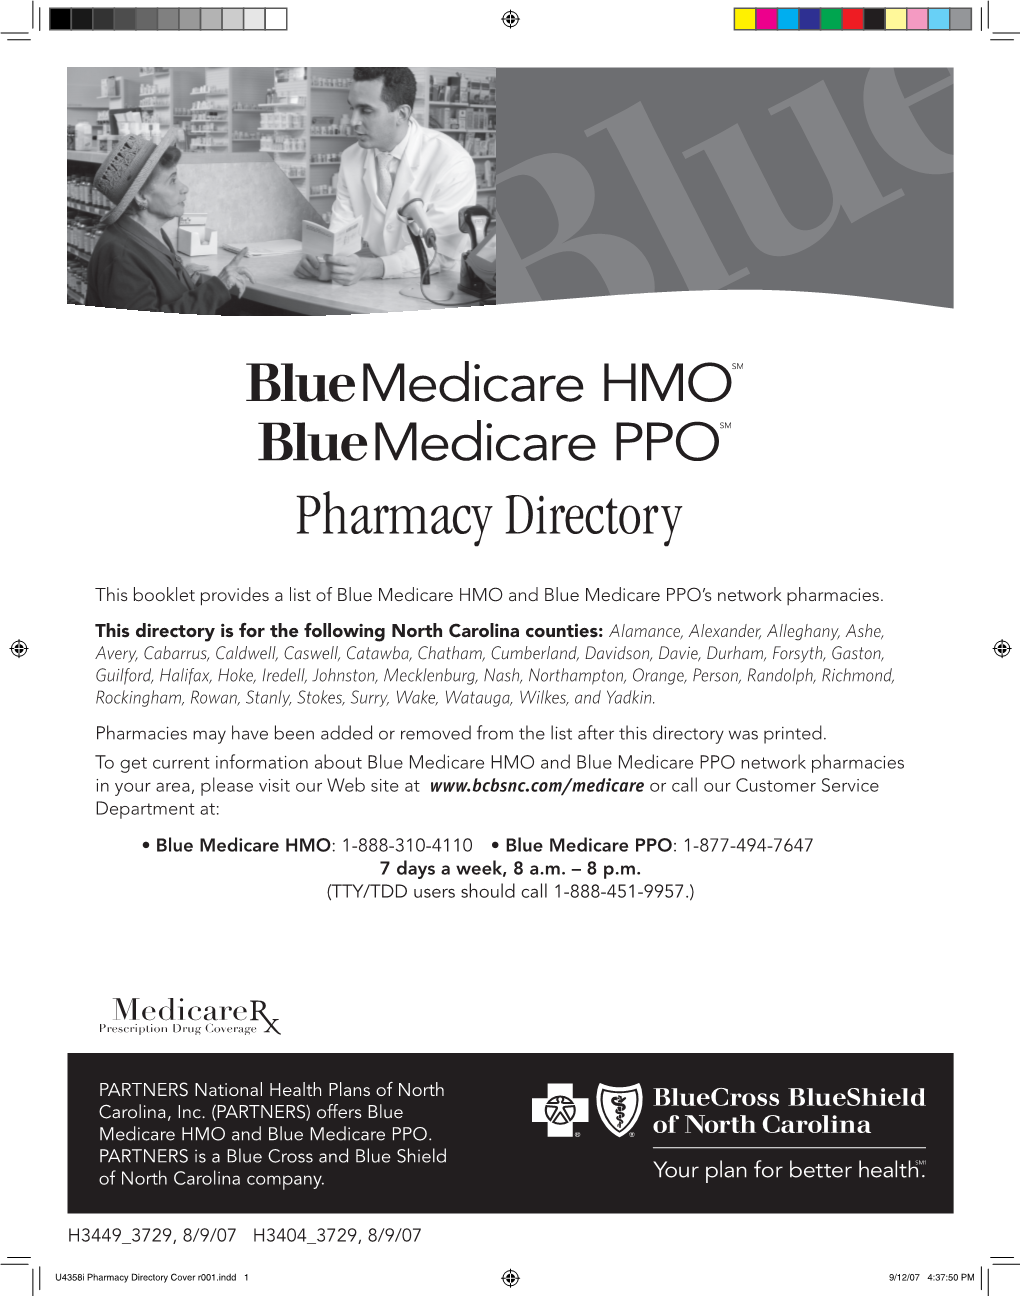 Offers Blue Medicare HMO and Blue Medicare PPO